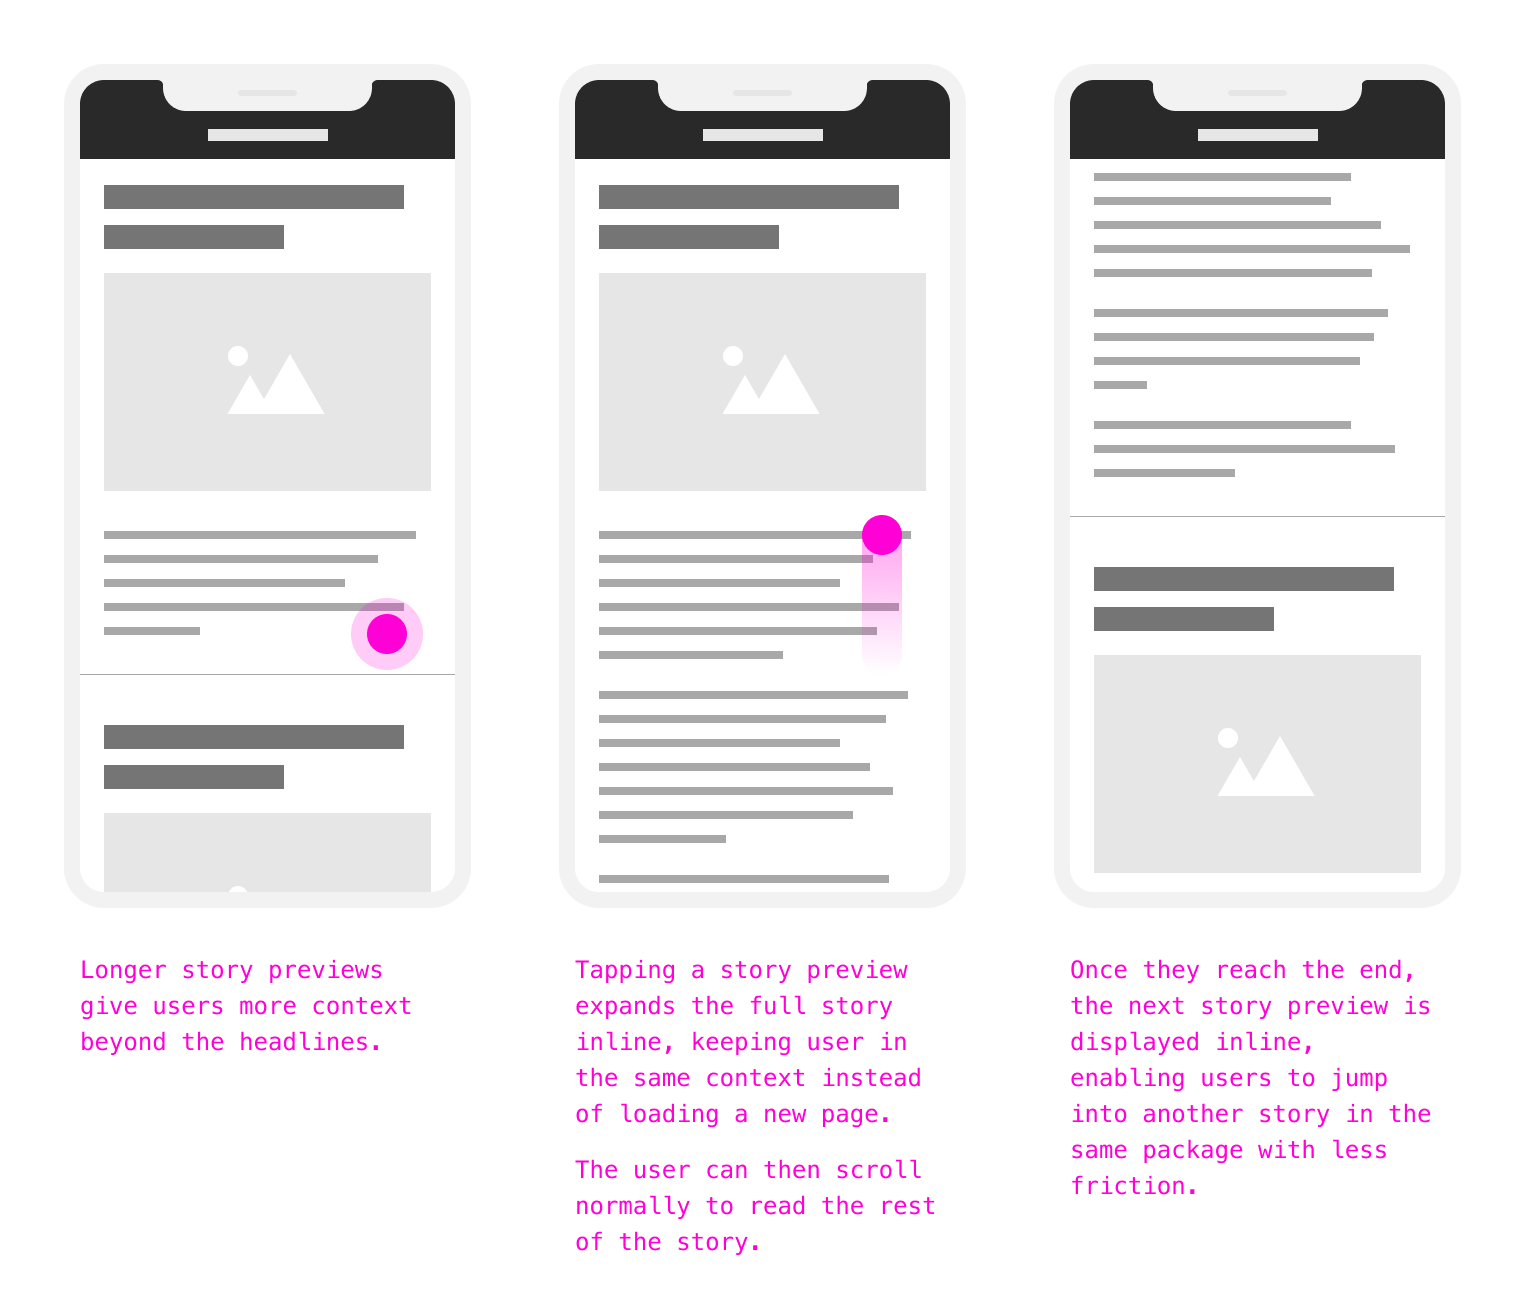 Viewing the full story inline keeps users in the same context and nudges them to continue discovering other stories, which are displayed immediately following the open story.